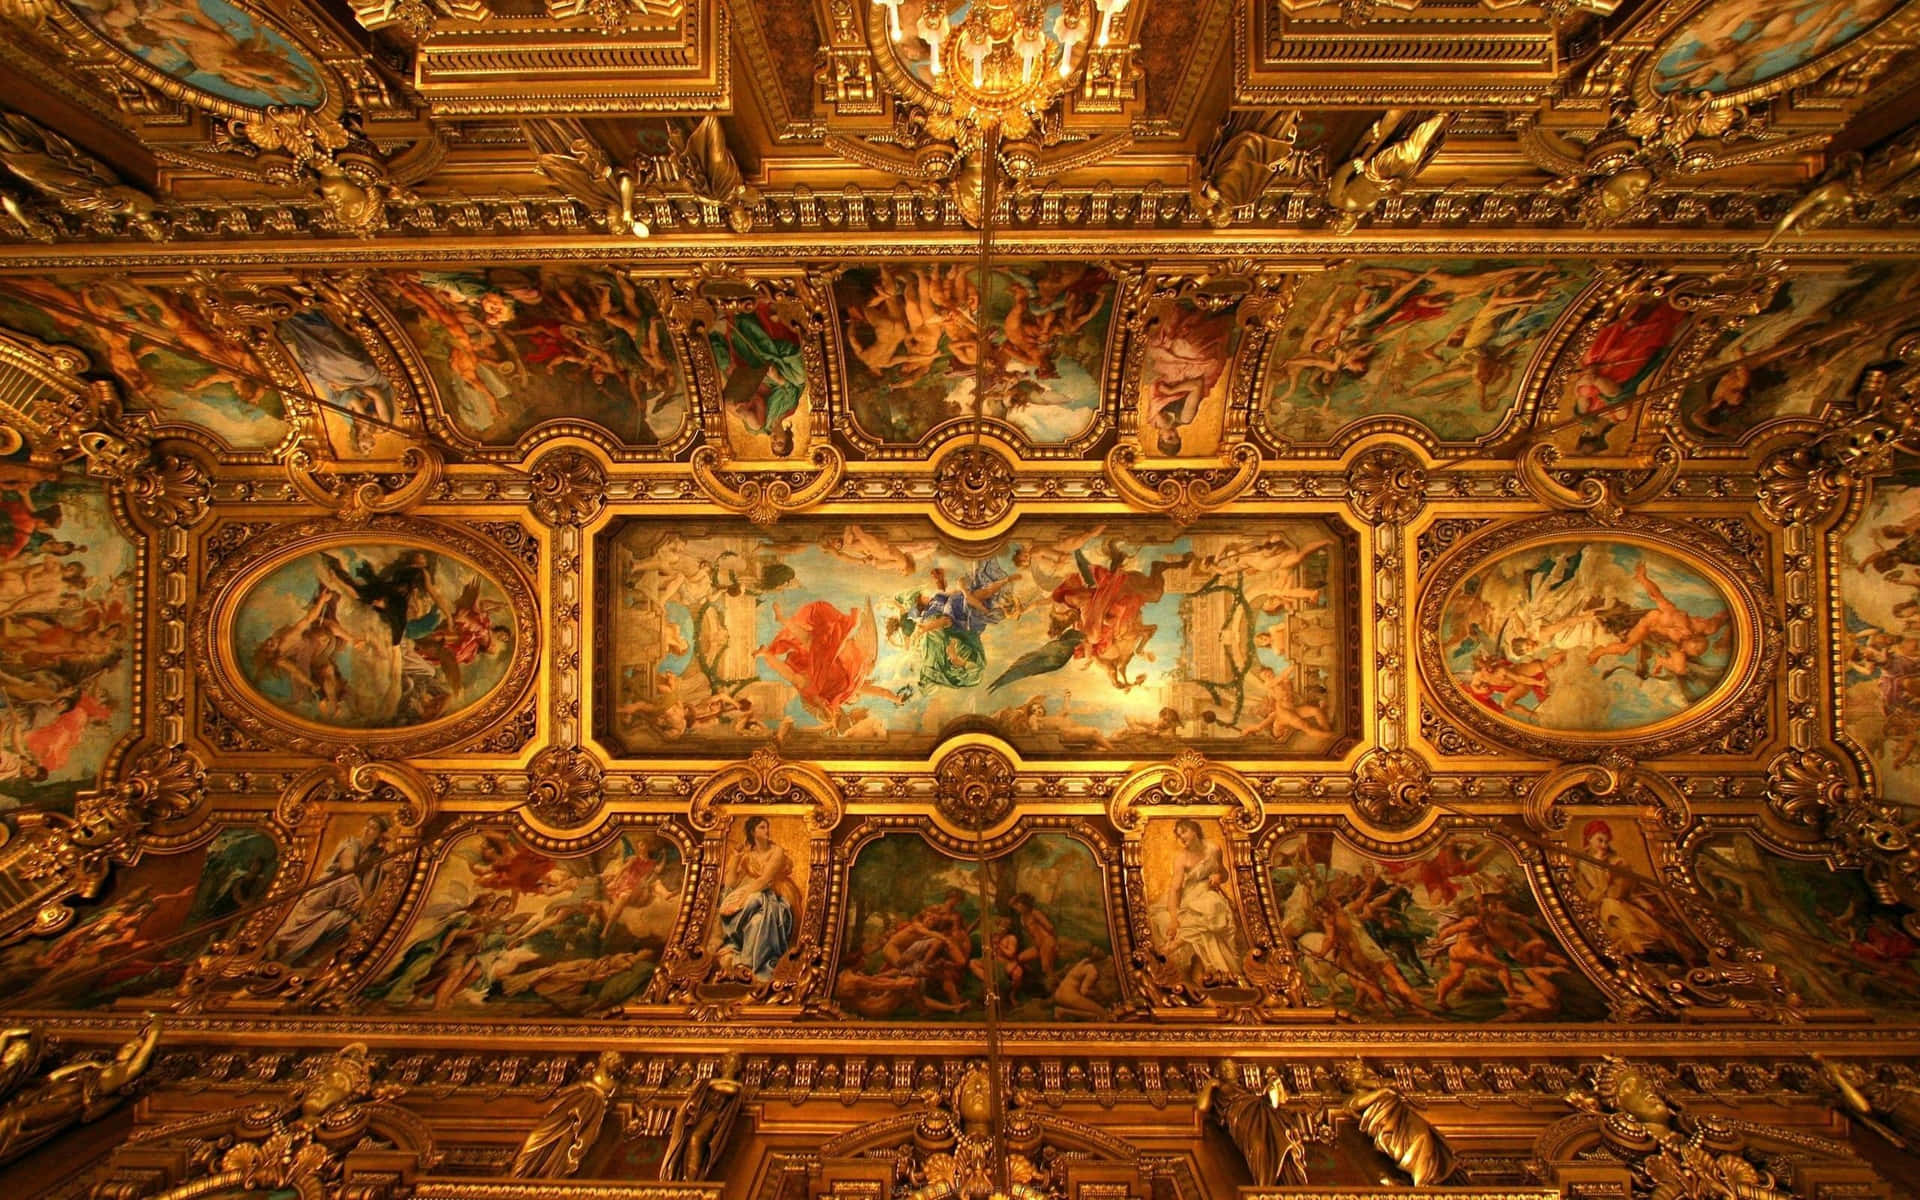 Be inspired by the magical art of the Renaissance. Wallpaper